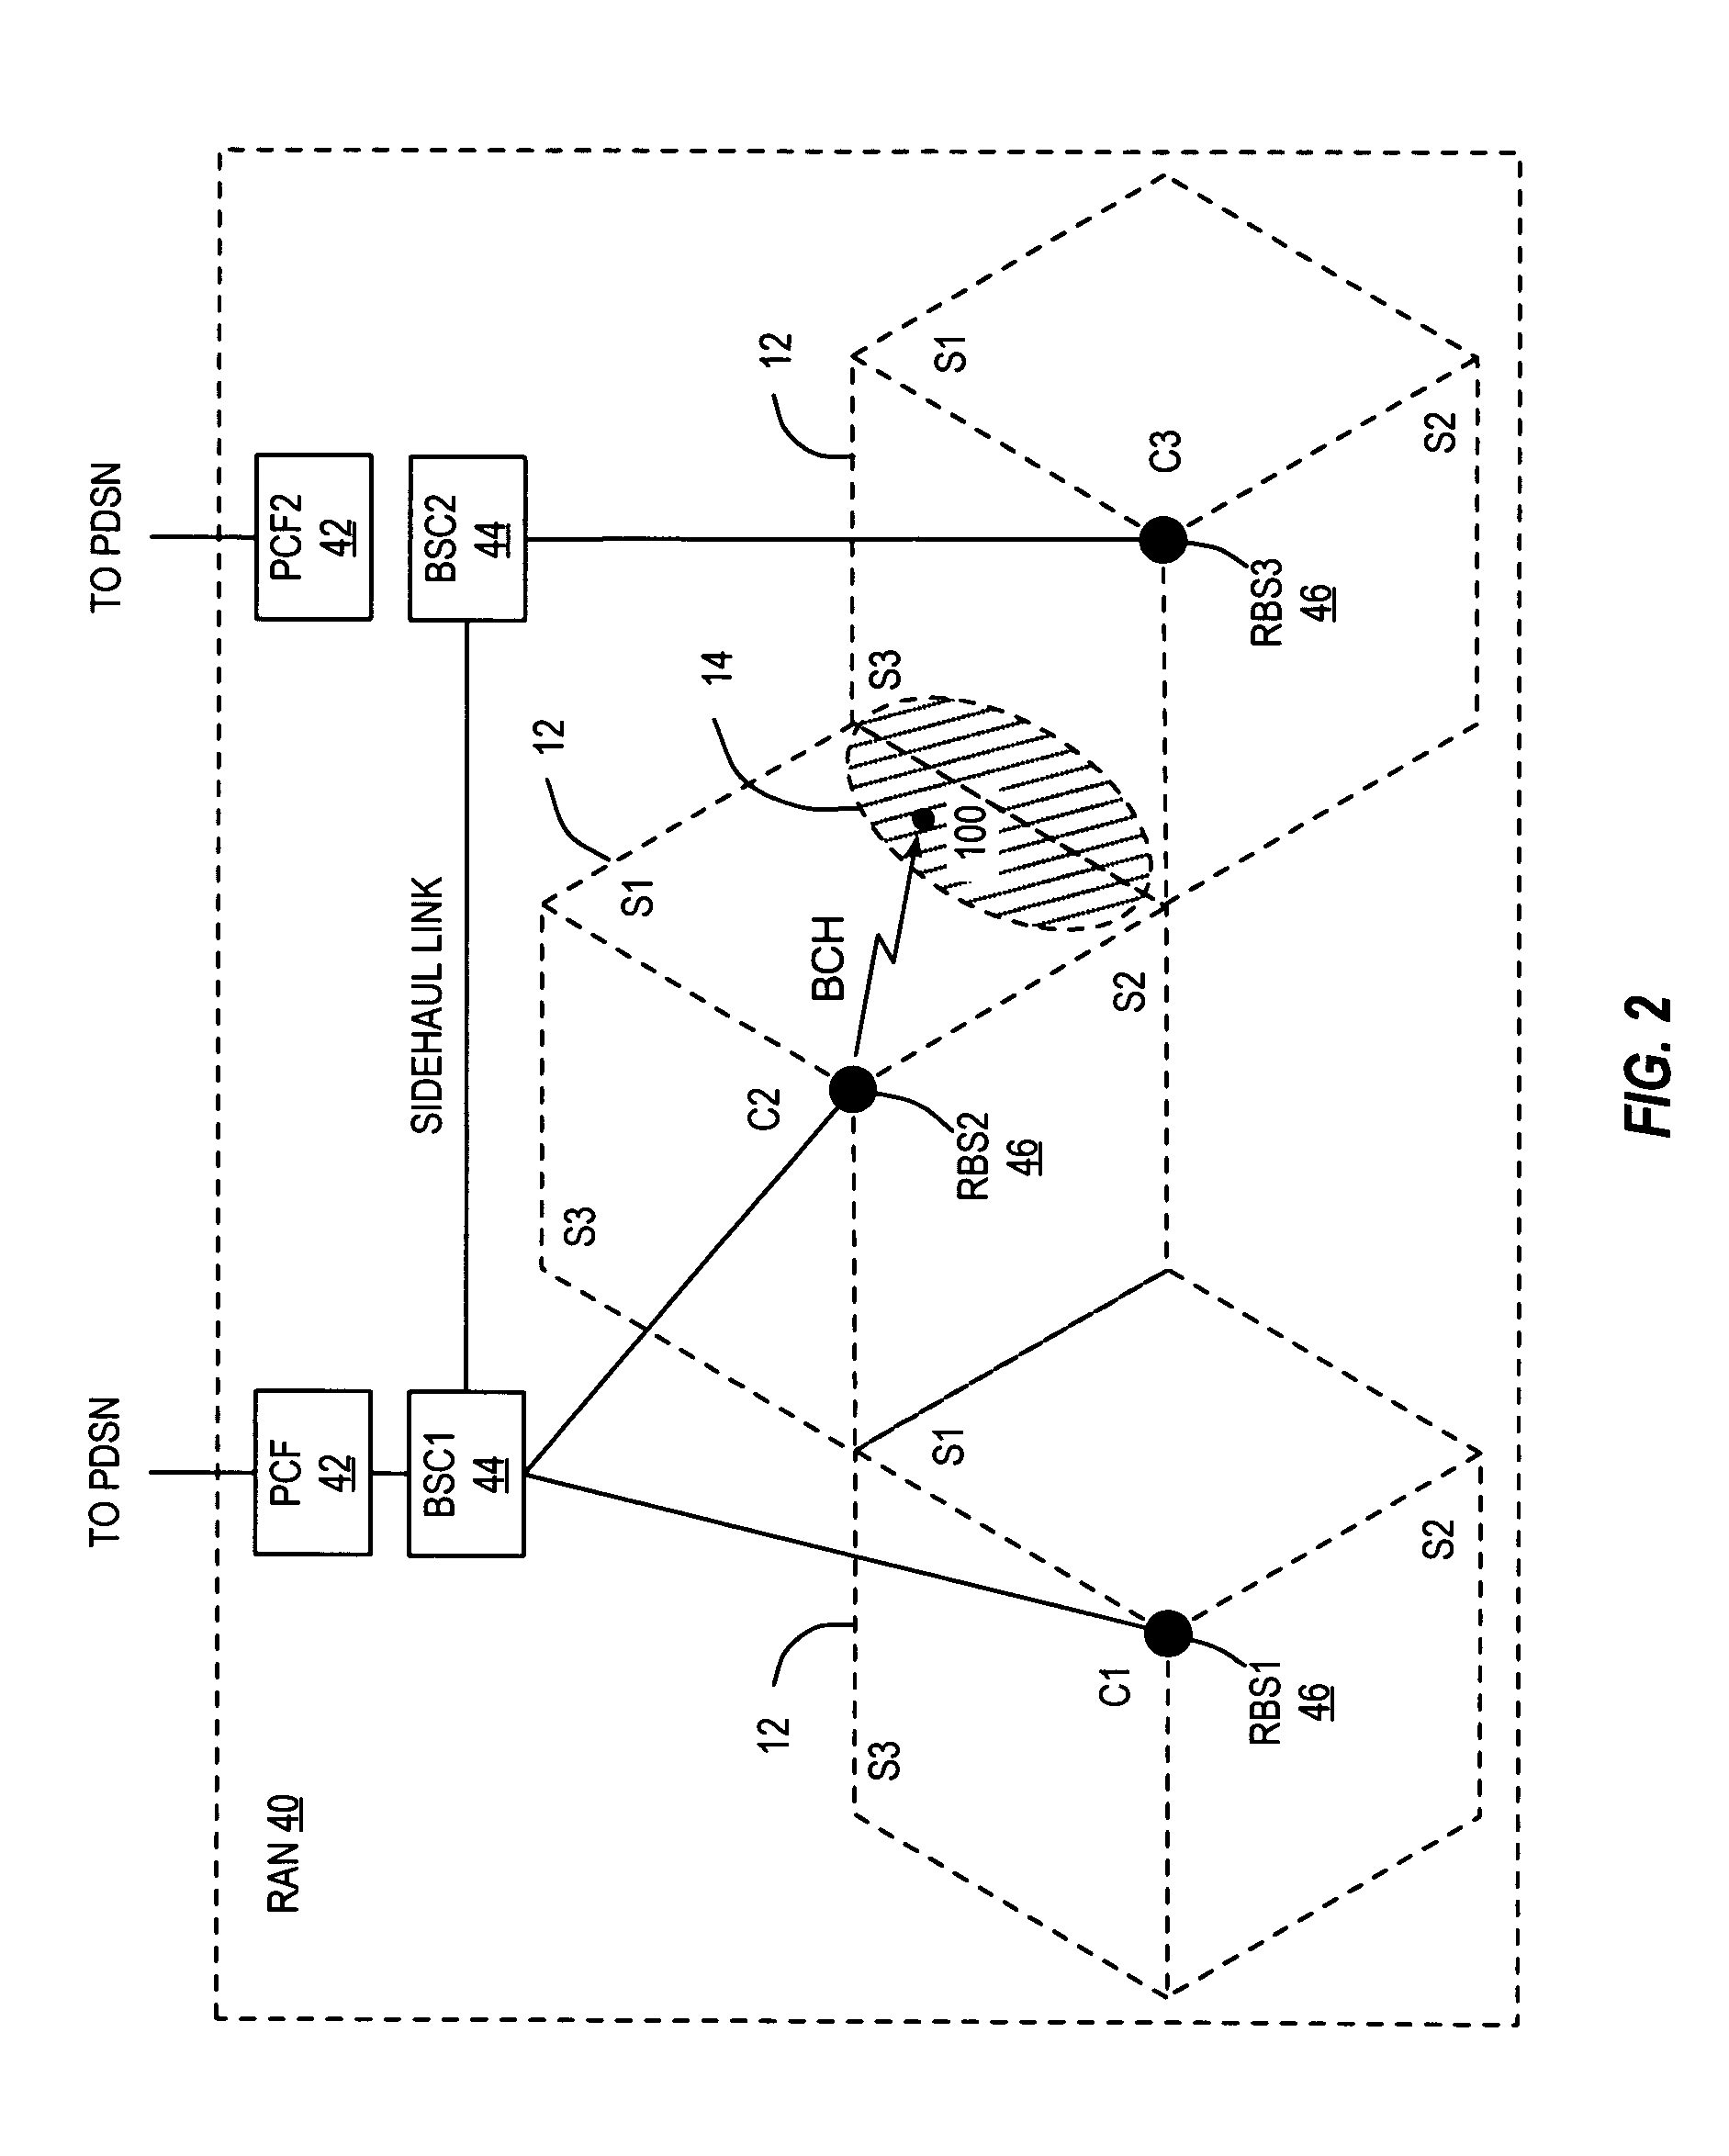 In-band signaling within broadcast stream and support for mixed flows